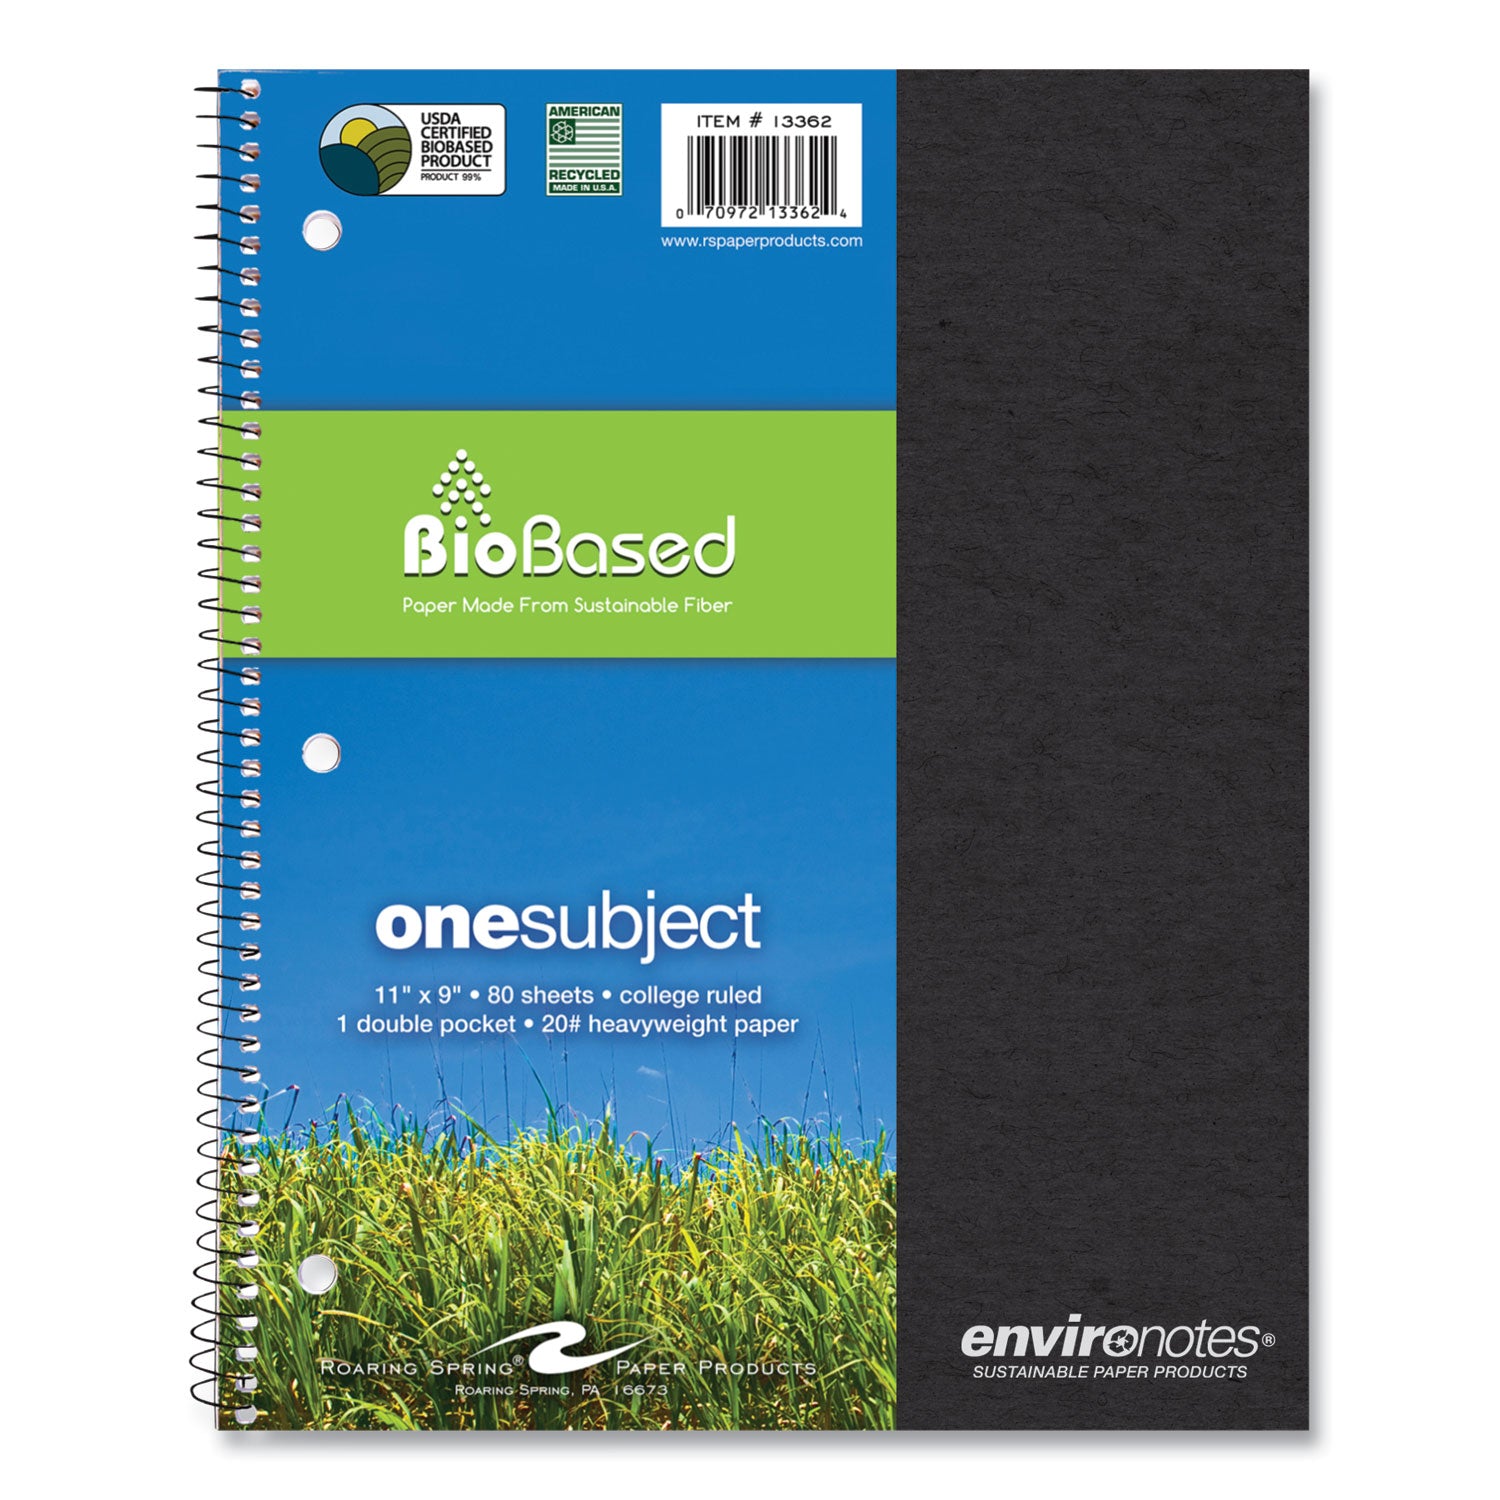 earthtones-biobased-1-subject-notebook-med-college-rule-random-asst-covers-80-11x9-sheets-24-ct-ships-in-4-6-bus-days_roa13362cs - 2